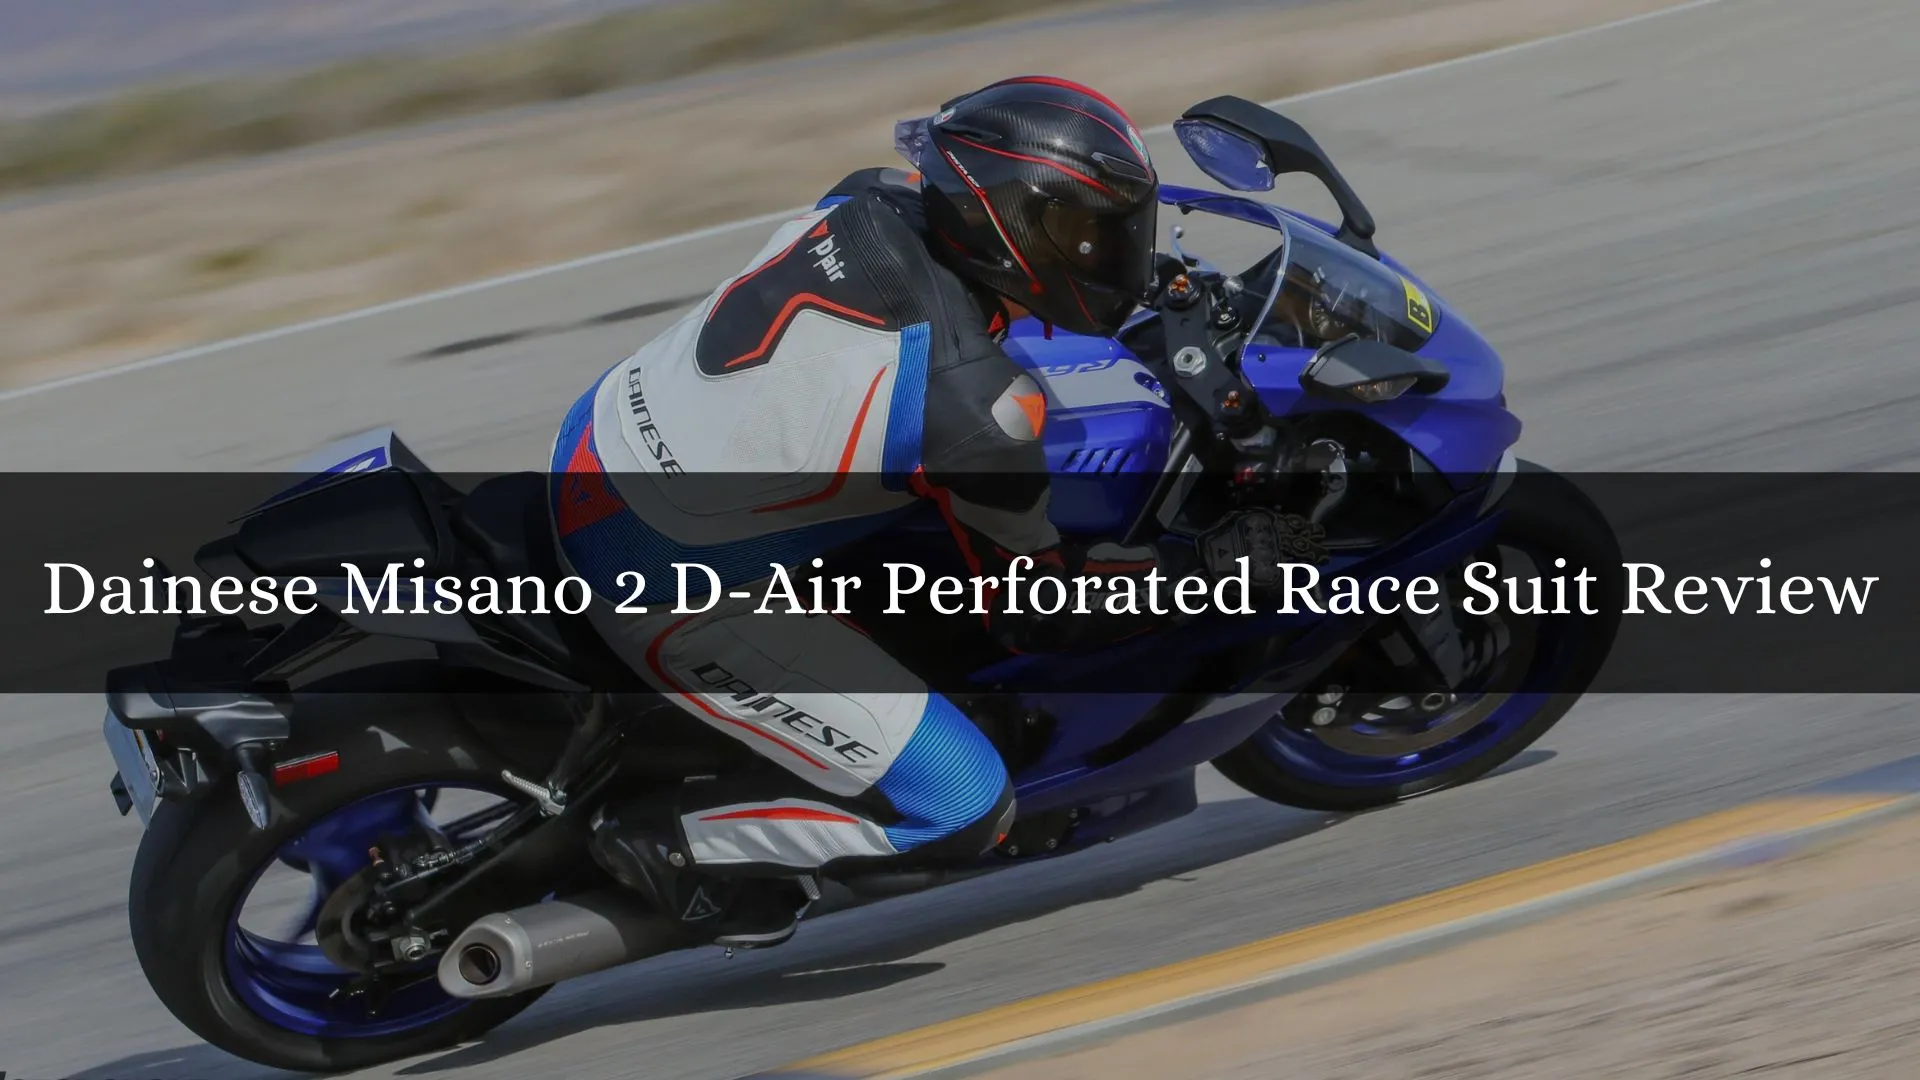 Dainese Misano 2 D-Air Perforated Race Suit Review